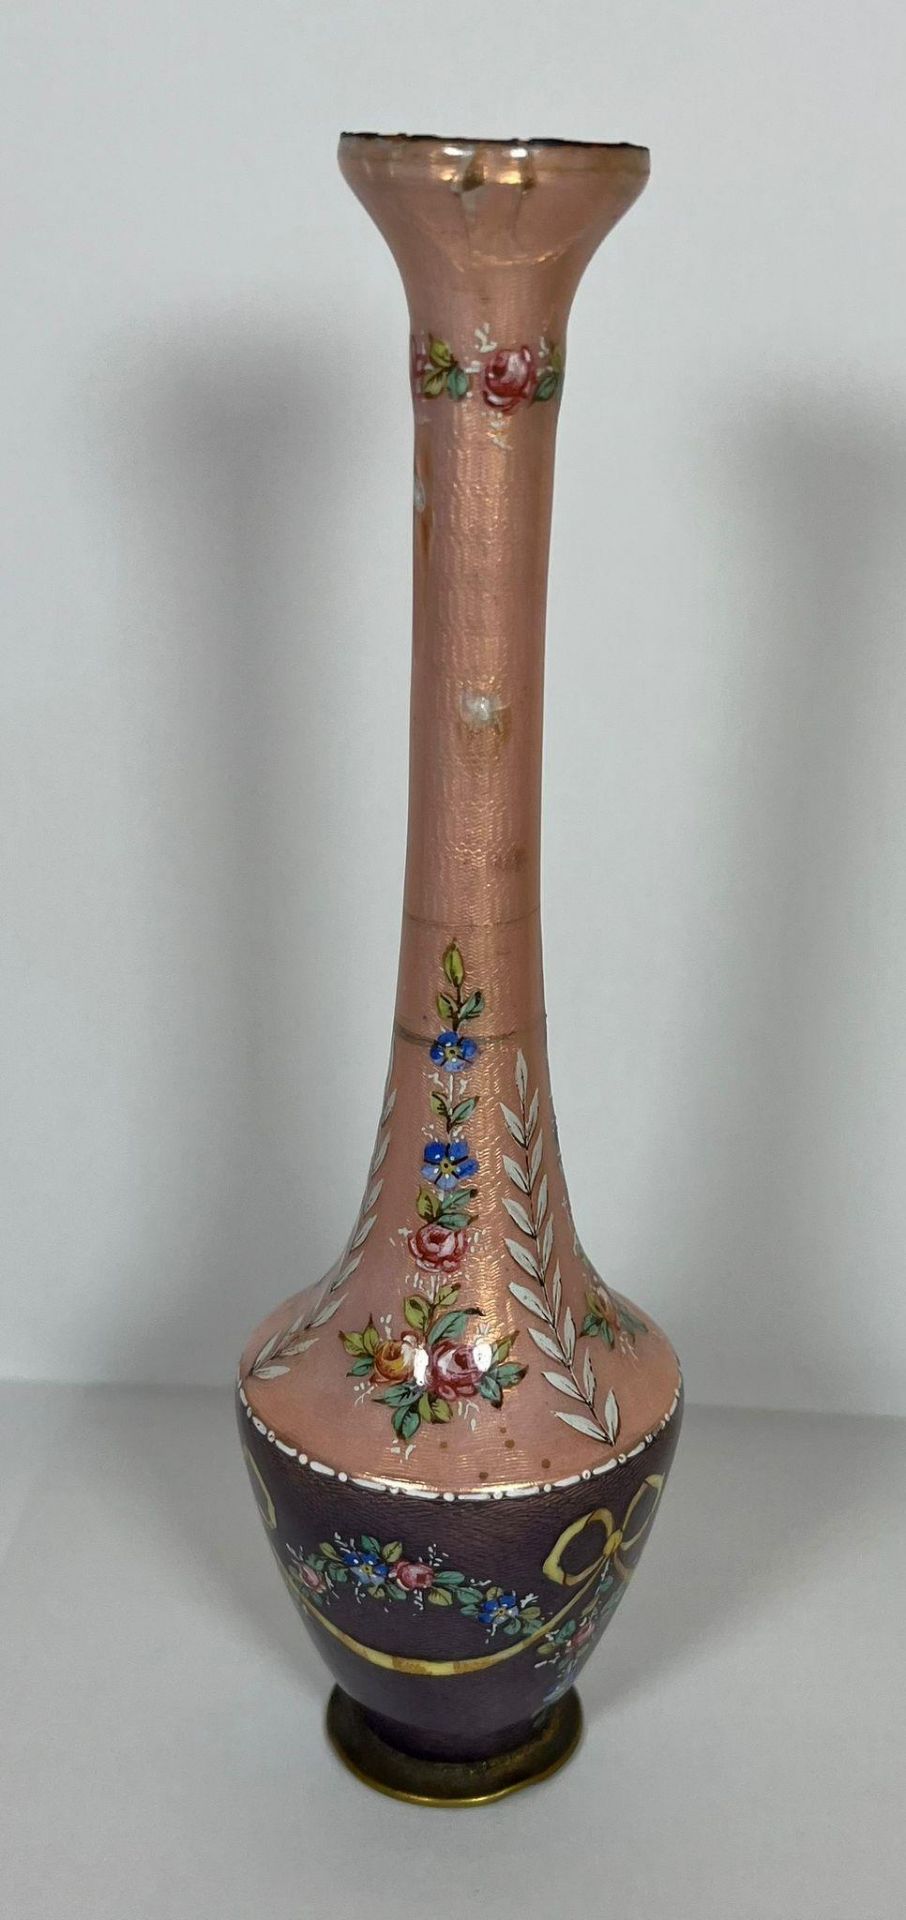 AN ANTIQUE EUROPEAN PINK & PURPLE ENAMEL DESIGN VASE DECORATED WITH FLORAL SWAG DESIGN, HEIGHT 15. - Image 2 of 5